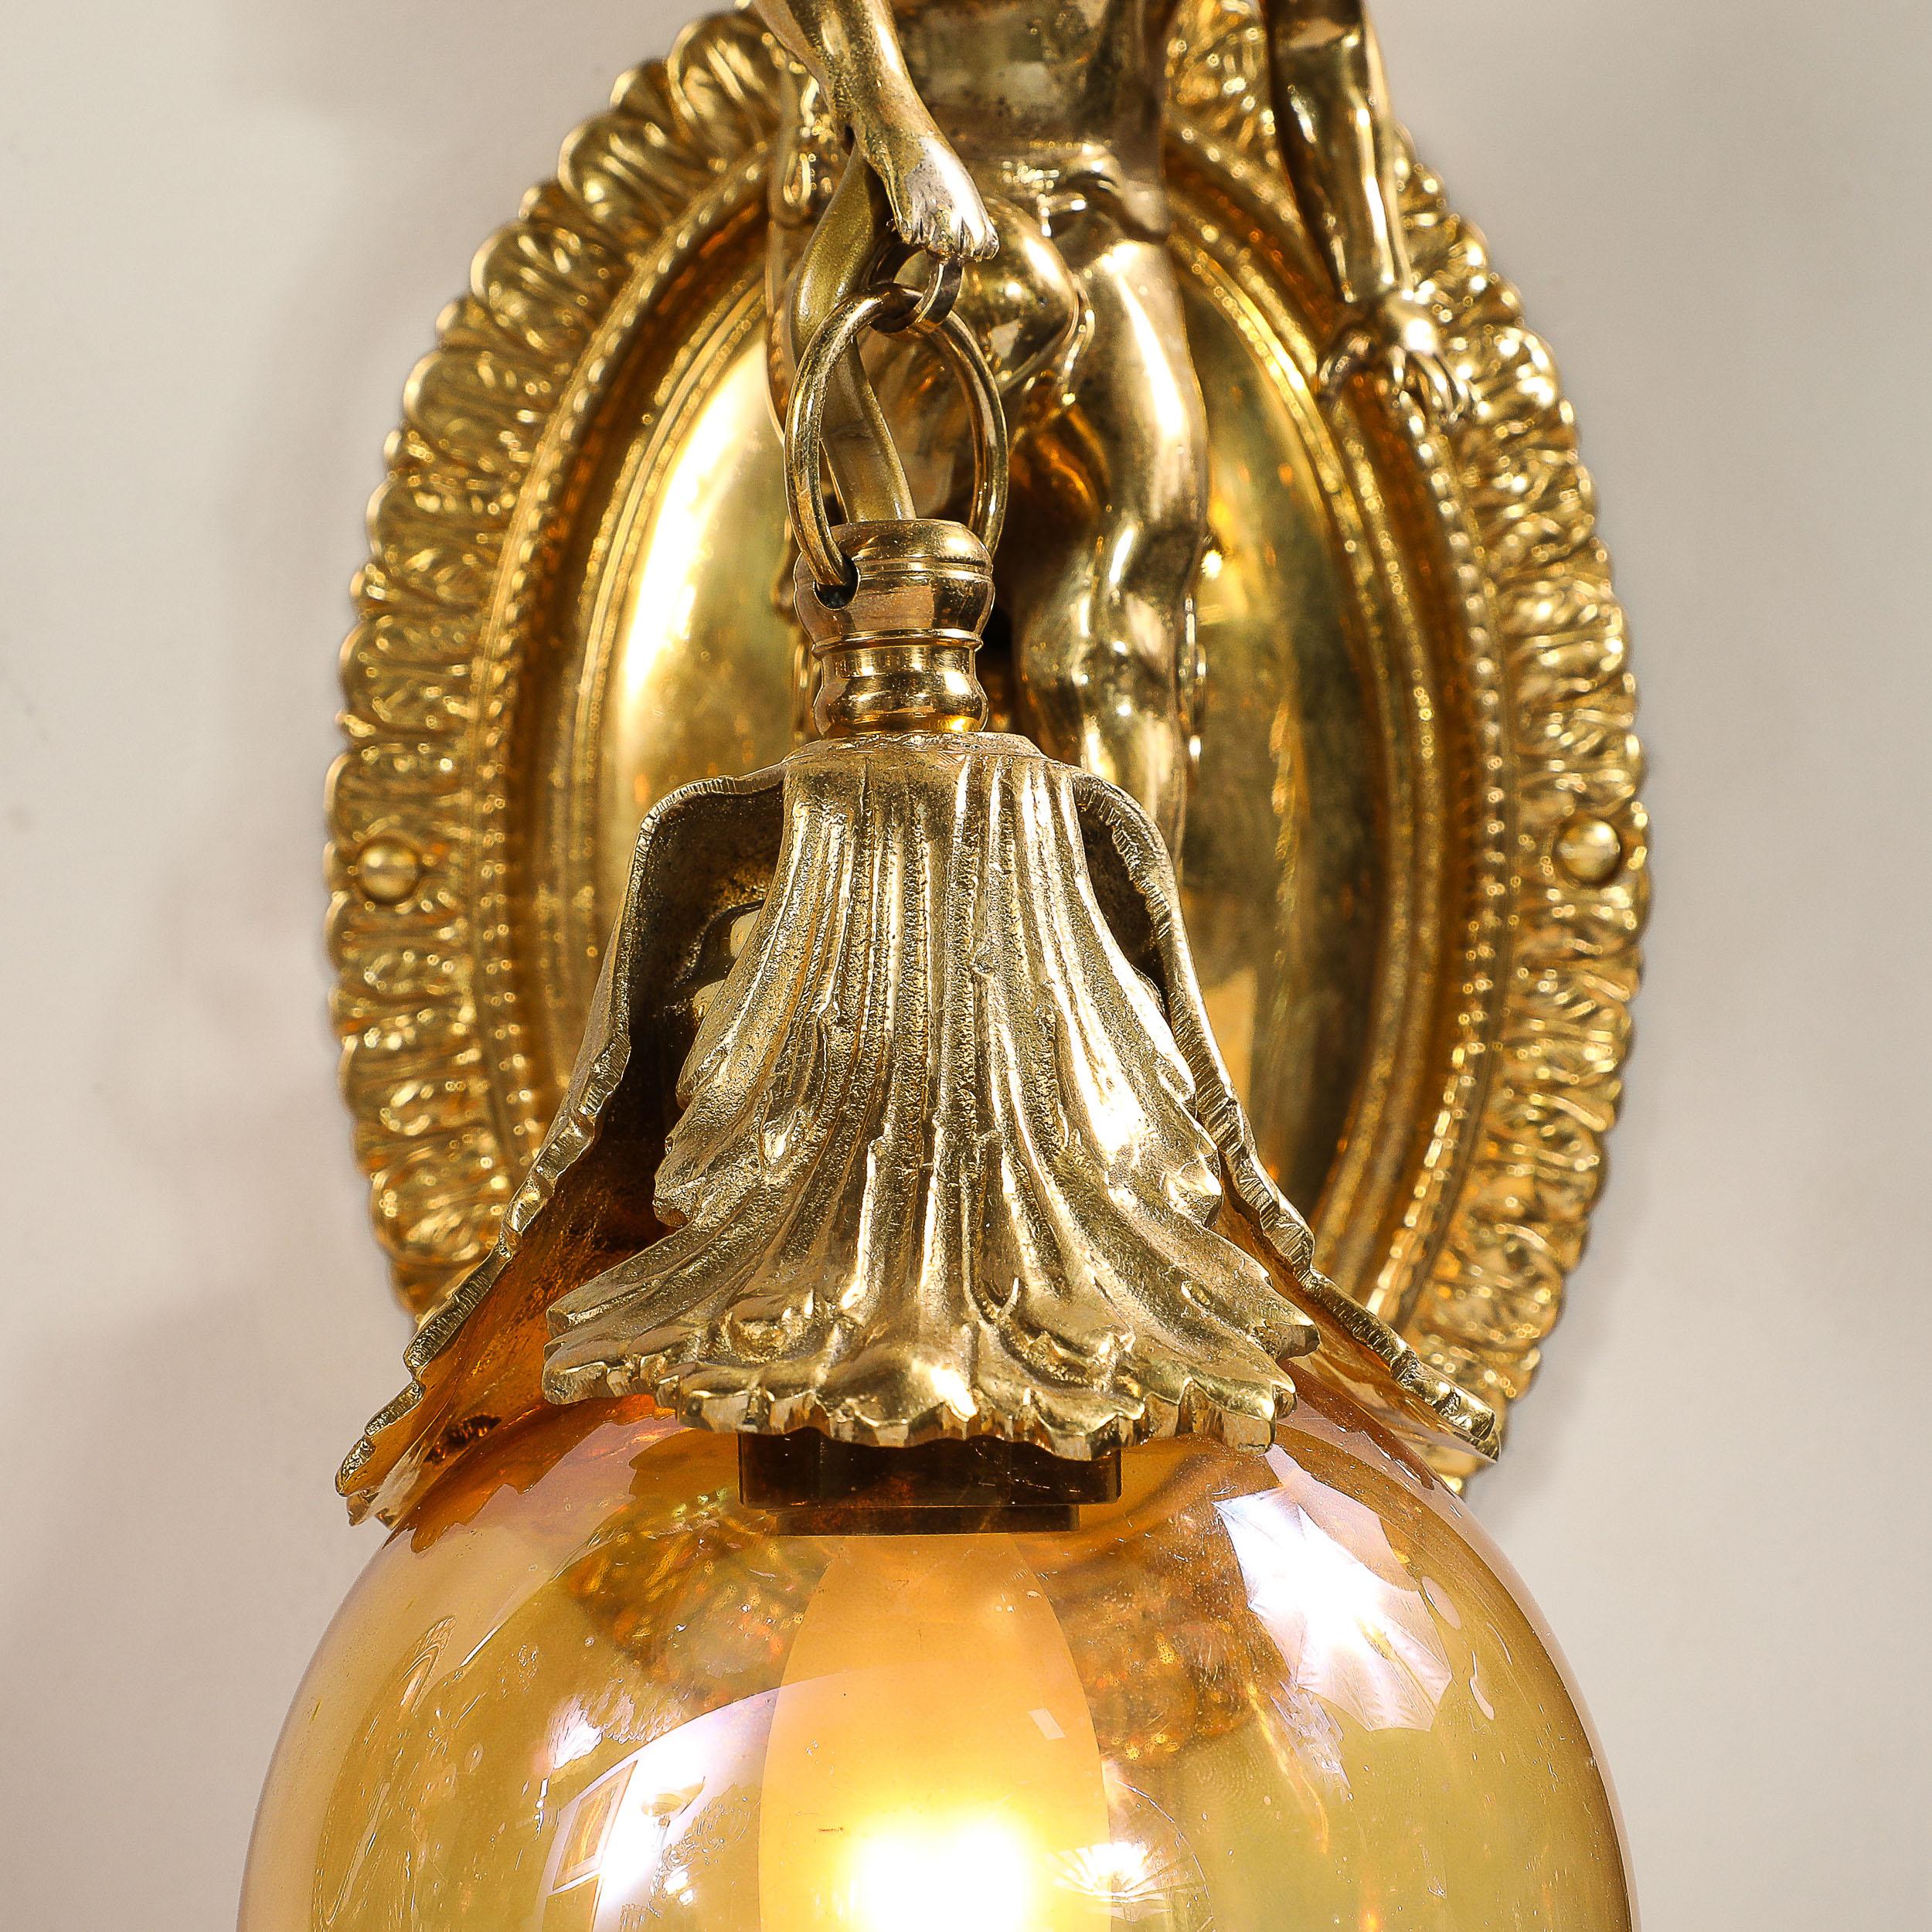 20th Century Pair of Neoclassical Cherub Sconces in Antique Brass w/ Smoked Amber Shades For Sale